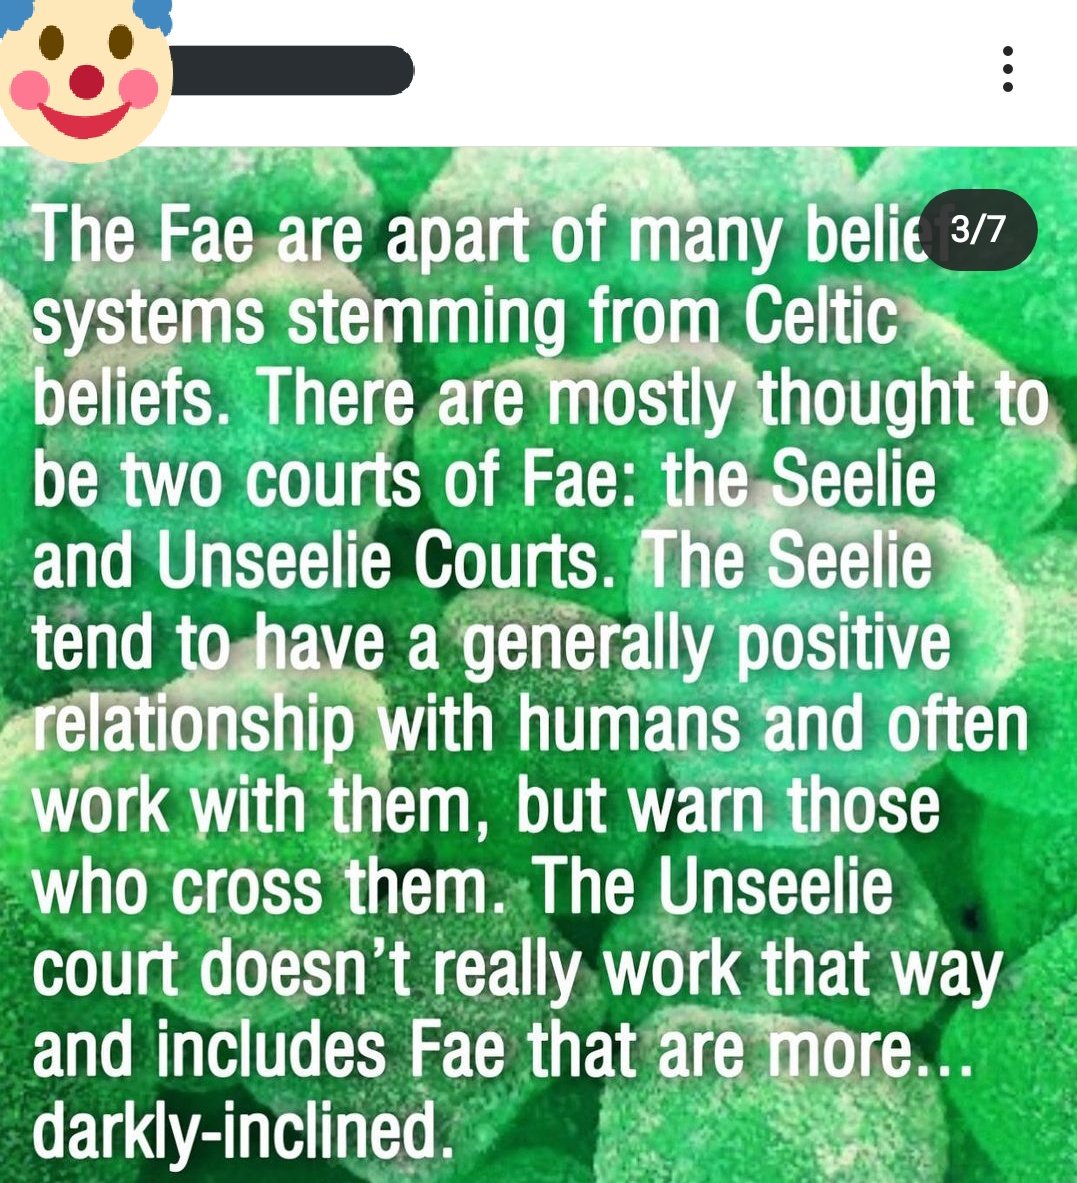 "Many Celtic beliefs"Okay, which ones? Because in Irish folklore they're called "trooping fairies" and "Seelie" is the anglicized version of the Scottish Gaelic word "sìth". Everything else in the post sounds like vauge pop culture osmosis and isn't quoting the actual lore